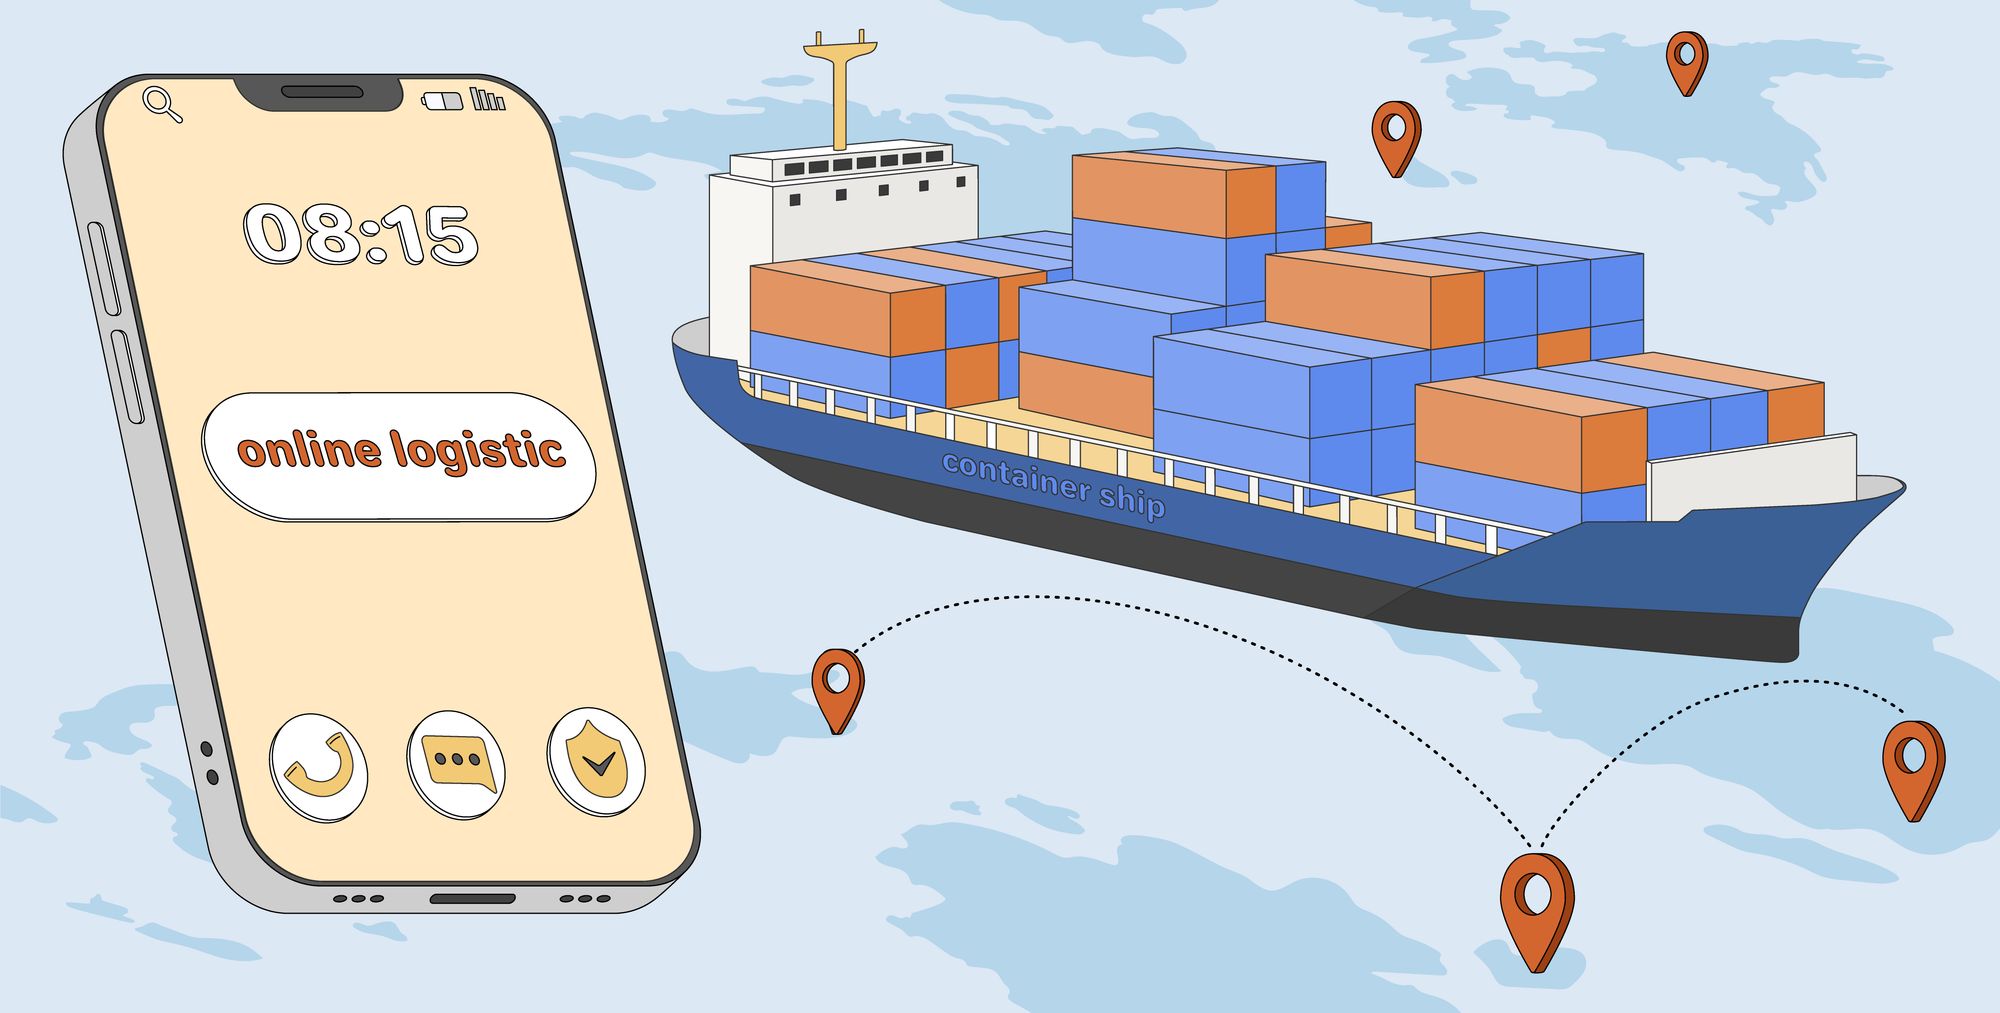 How Does Smart Technology Help the Maritime Industry?